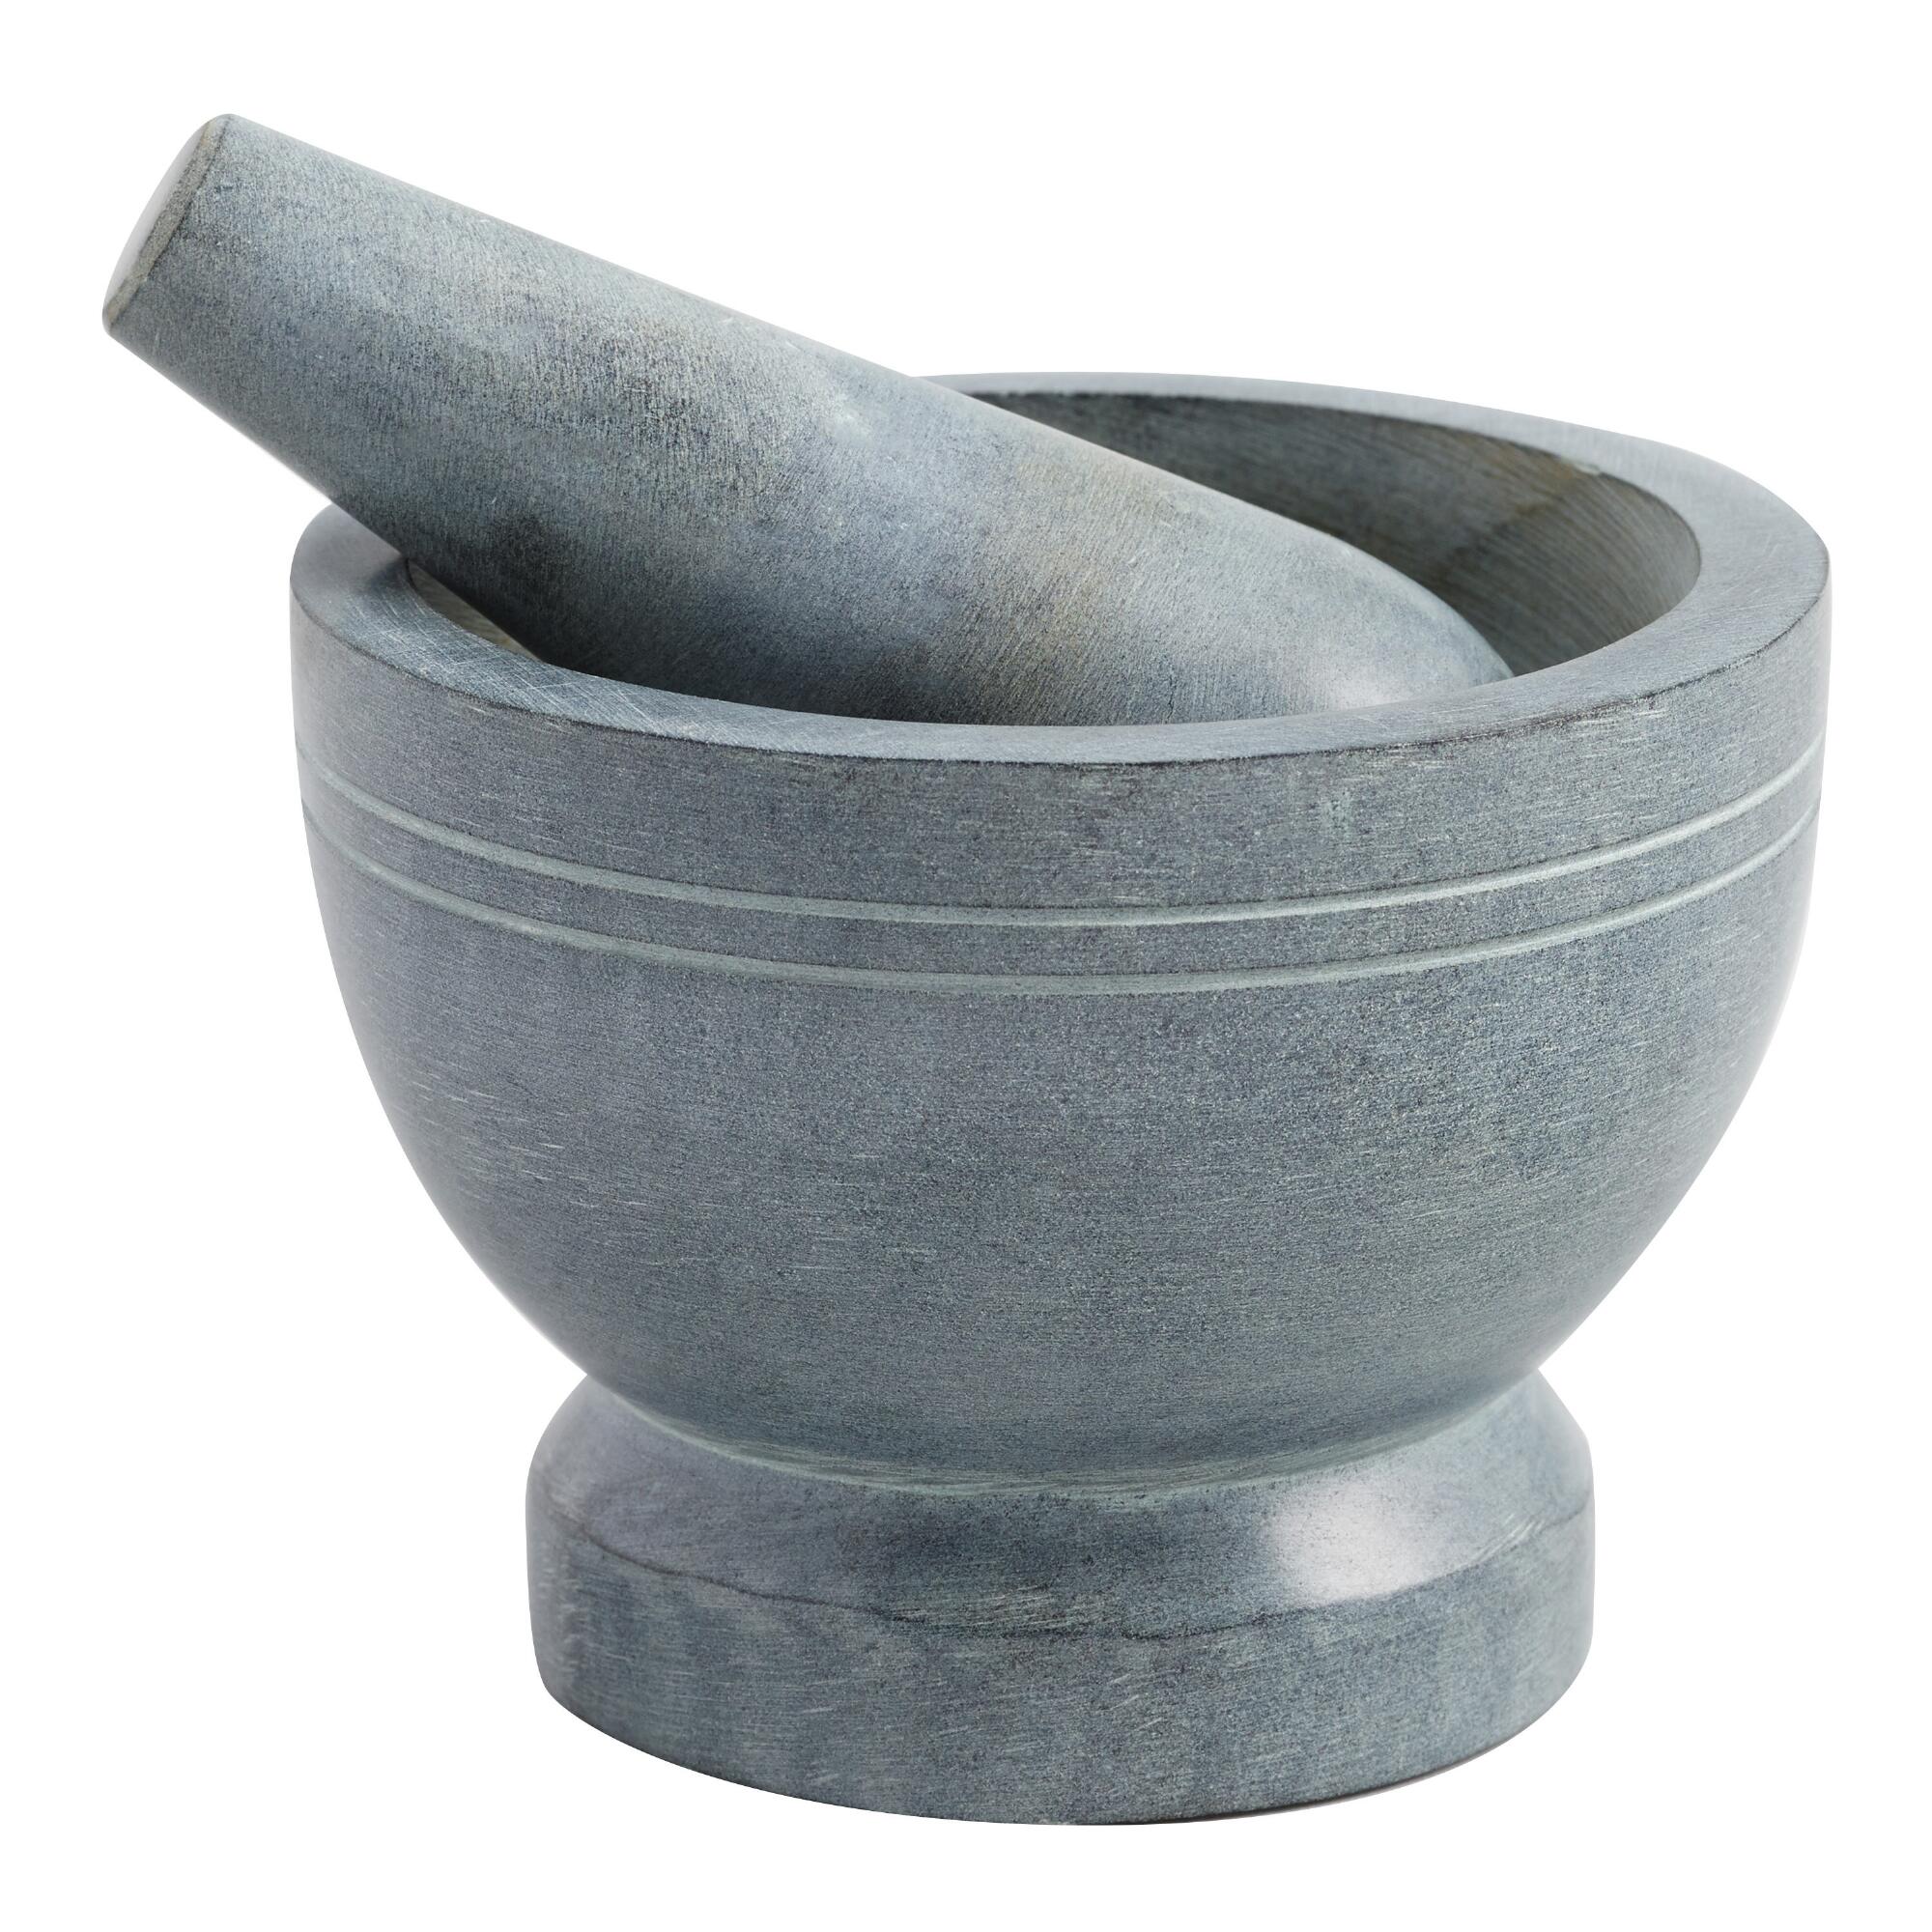 Polished Soapstone Mortar and Pestle by World Market